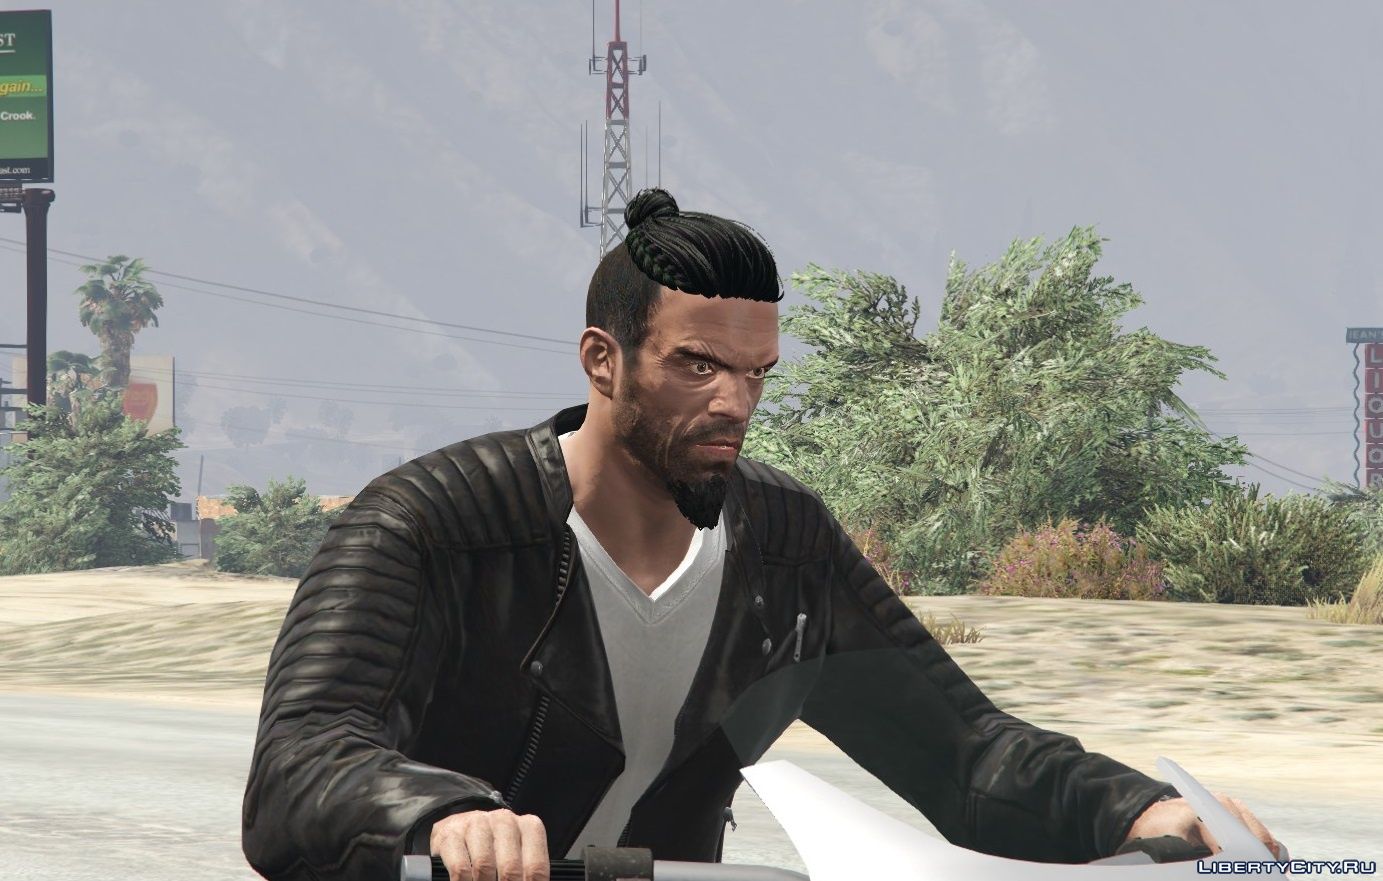 Files to replace  in GTA 5 (109 files) / Files have  been sorted by downloads in ascending order